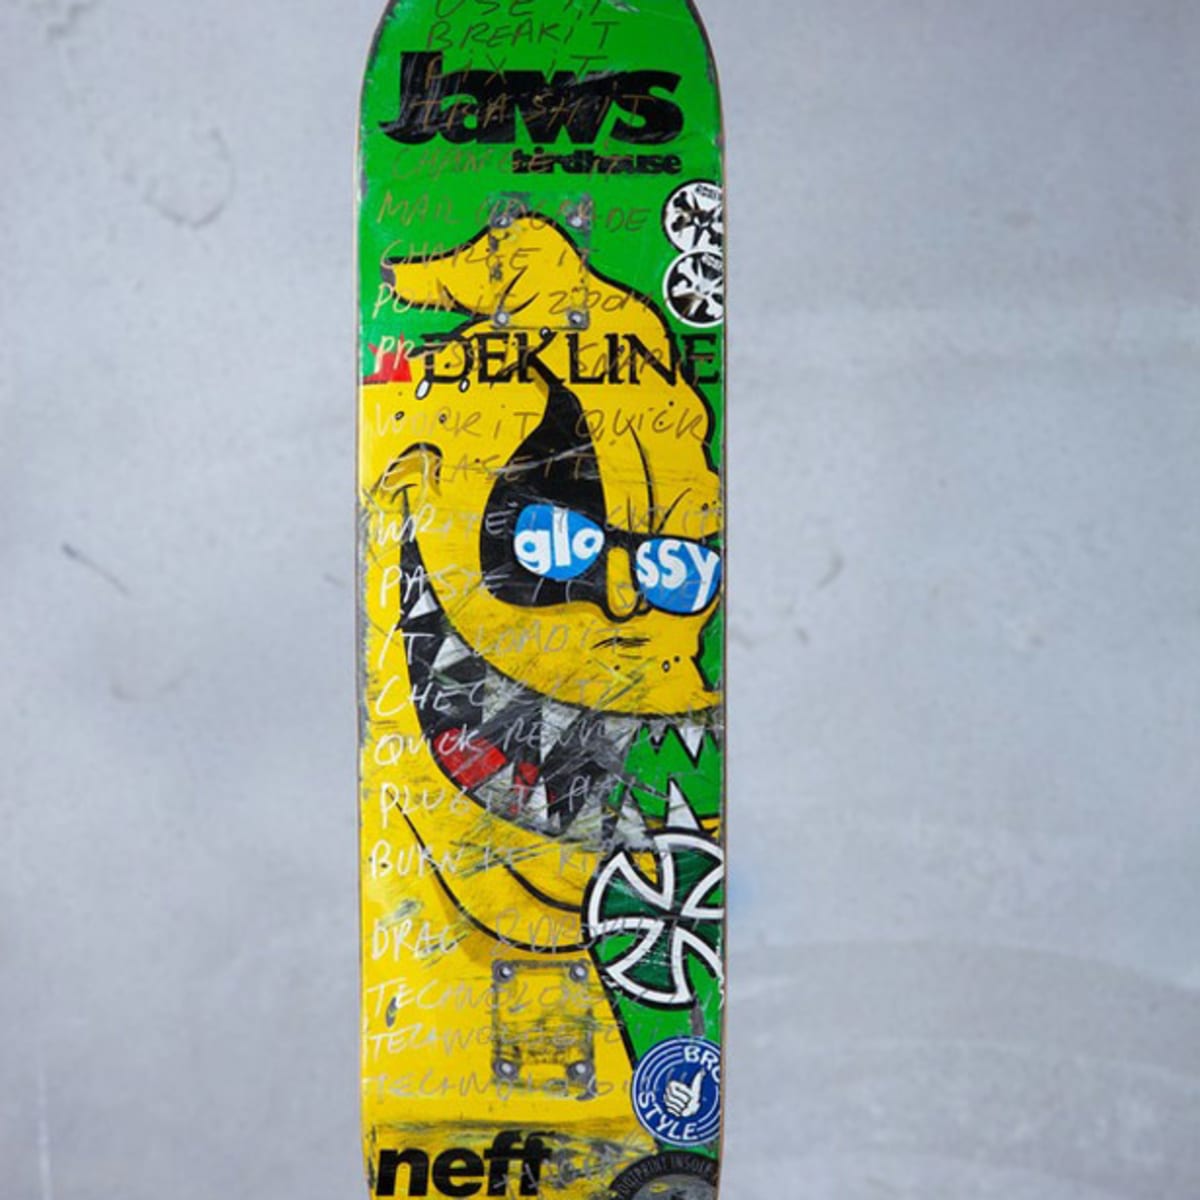 Daft Punk X Jaws Skateboard Featured As Part Of Boards  Bands Fundraiser  EDM News Magnetic Magazine